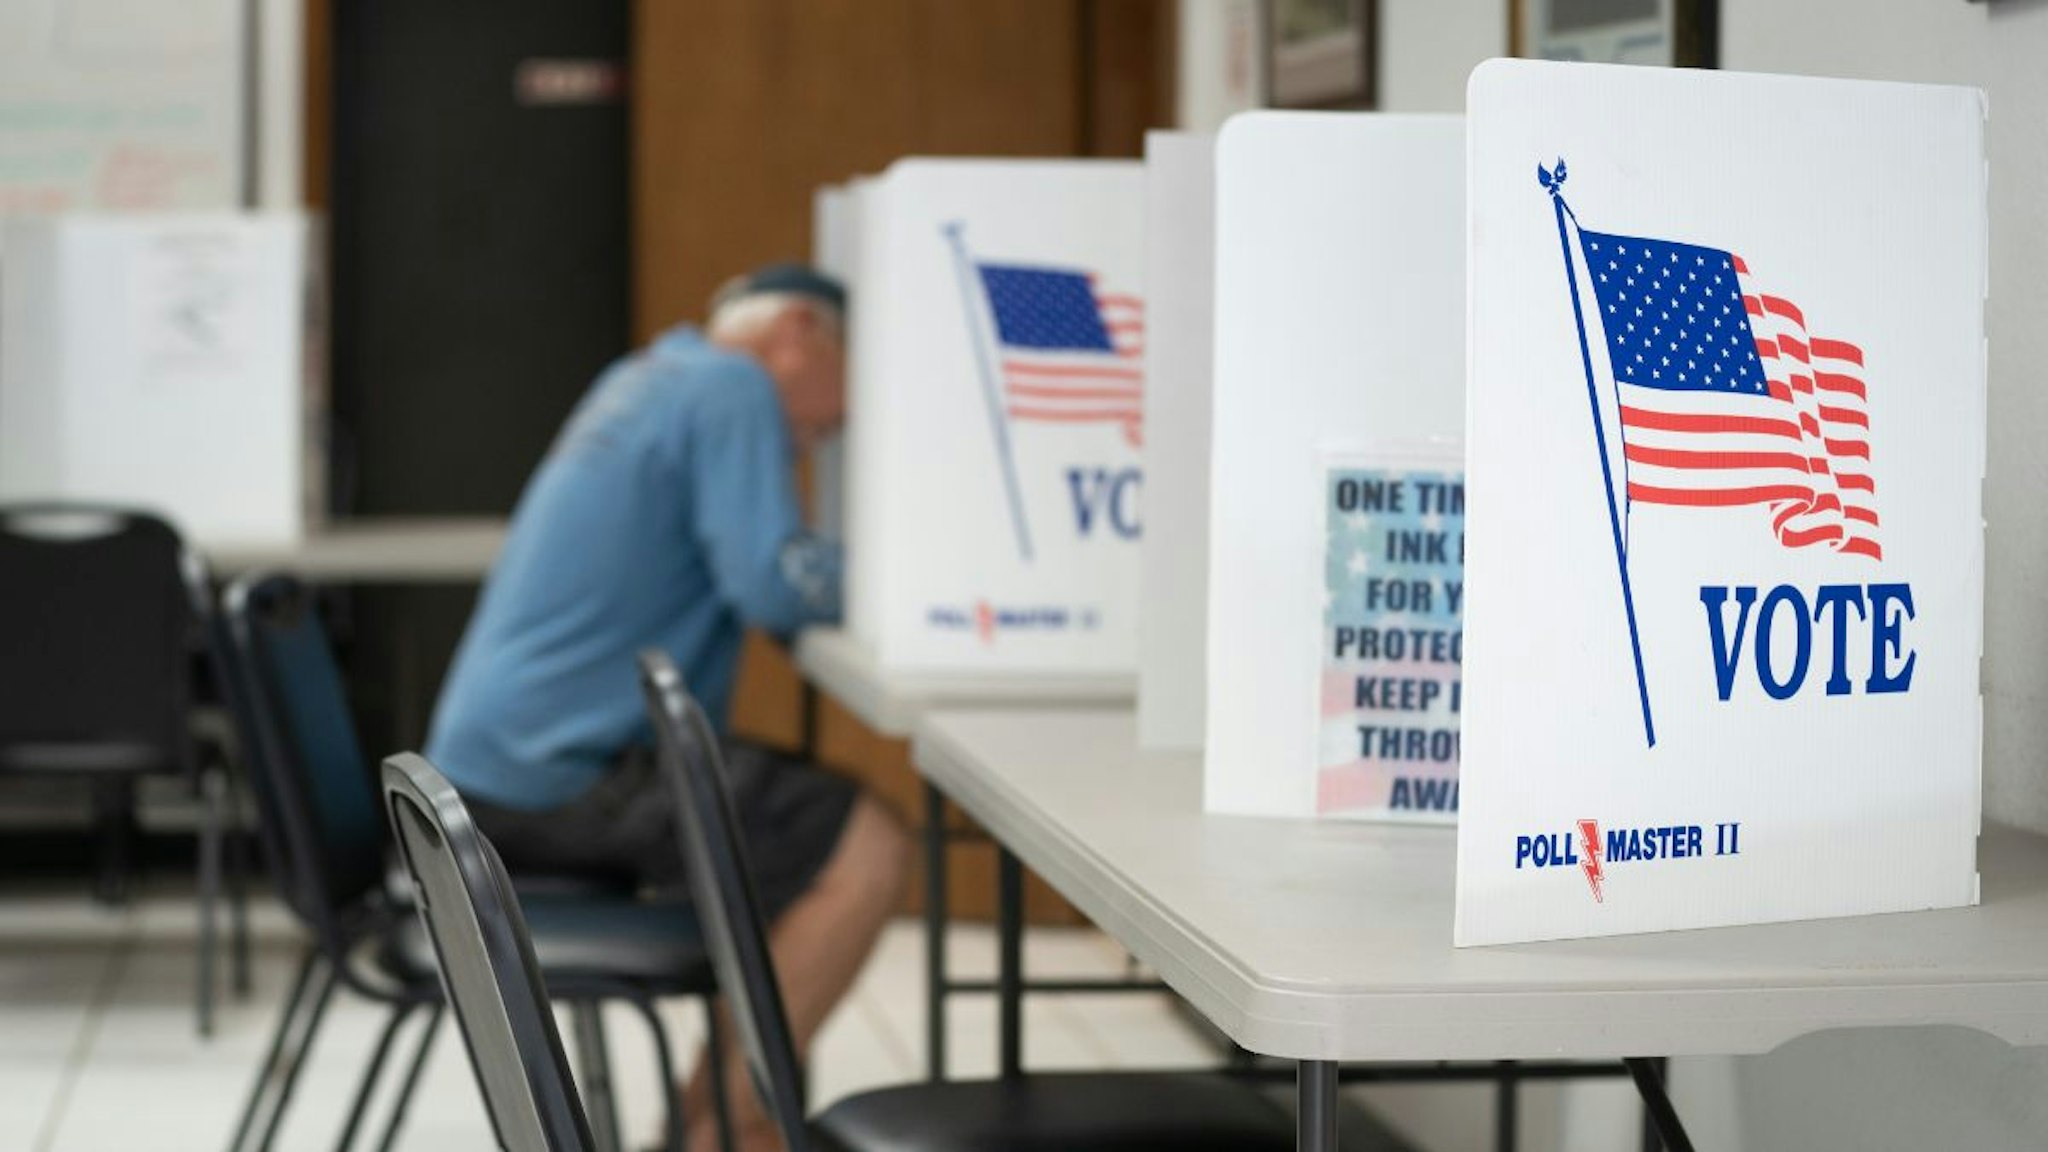 A man fills out a ballot at a voting booth on May 17, 2022 in Mt. Gilead, North Carolina.